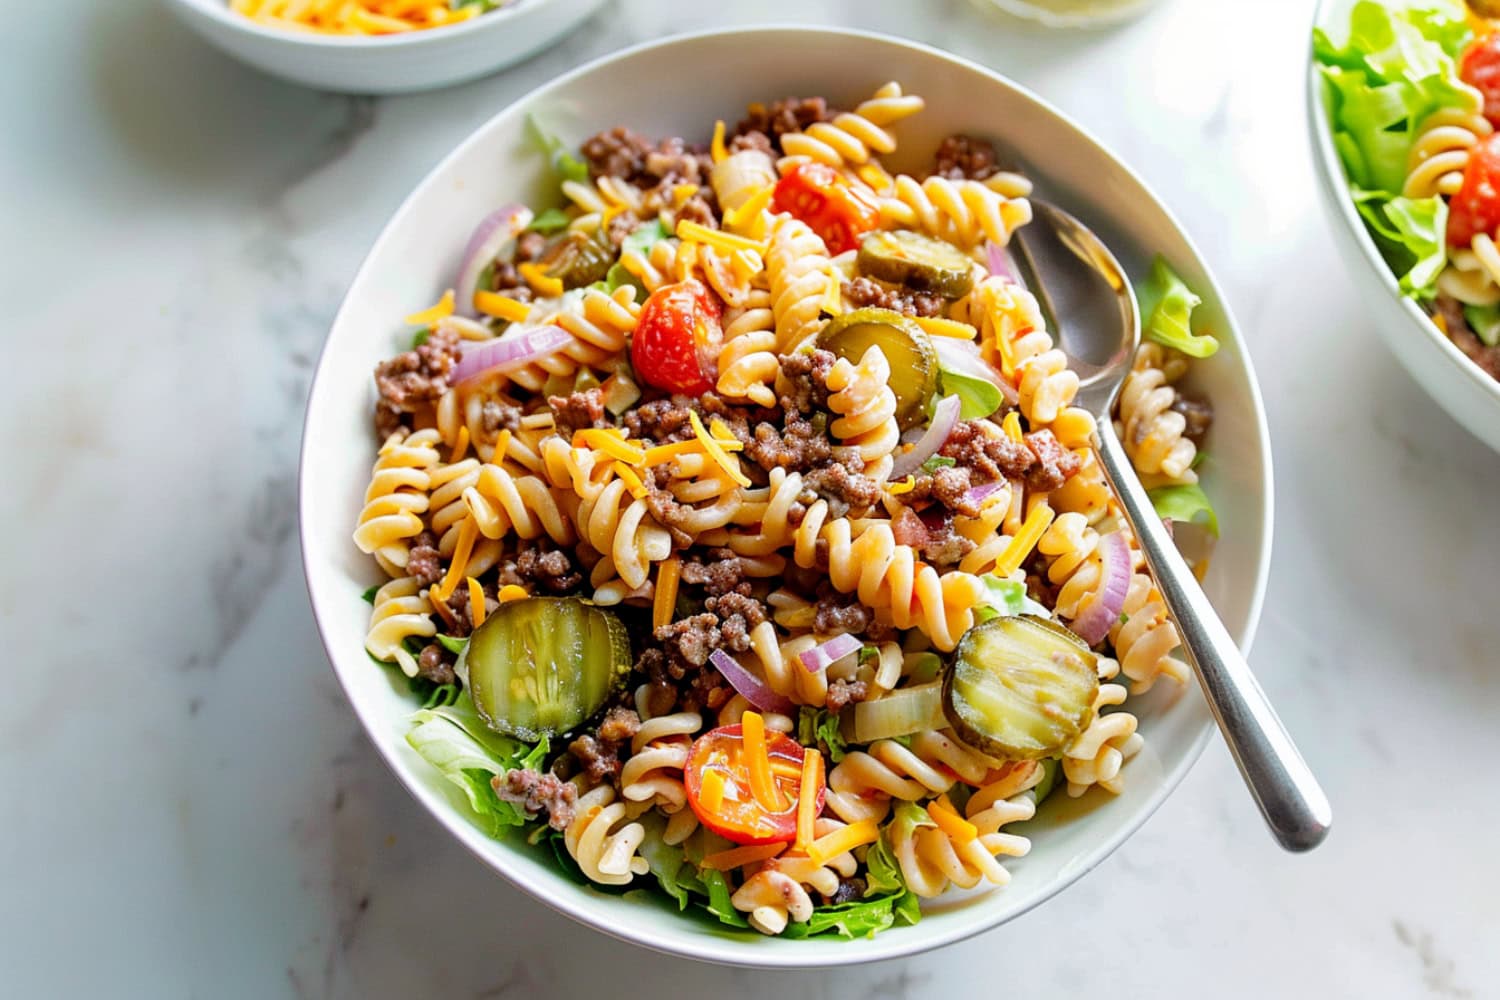 A bowl of homemade Jimmy Buffett rotini pasta salad with ground beef, cheese and veggies.